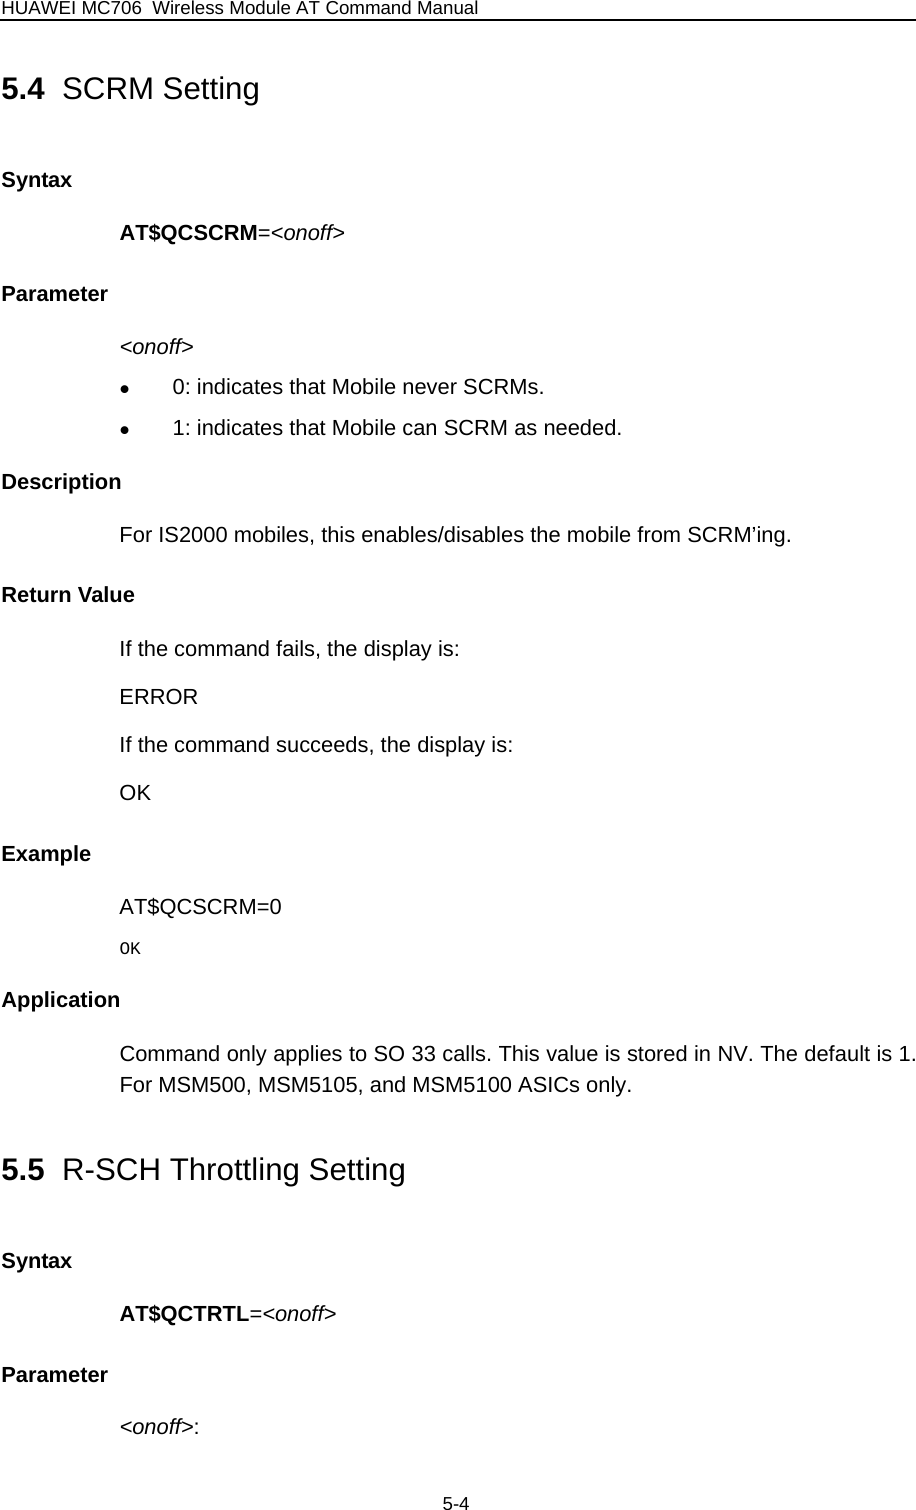 HUAWEI MC706 Wireless Module AT Command Manual 5.4  SCRM Setting Syntax AT$QCSCRM=&lt;onoff&gt; Parameter &lt;onoff&gt; z 0: indicates that Mobile never SCRMs. z 1: indicates that Mobile can SCRM as needed. Description For IS2000 mobiles, this enables/disables the mobile from SCRM’ing. Return Value If the command fails, the display is: ERROR If the command succeeds, the display is: OK Example AT$QCSCRM=0 OK Application Command only applies to SO 33 calls. This value is stored in NV. The default is 1. For MSM500, MSM5105, and MSM5100 ASICs only. 5.5  R-SCH Throttling Setting Syntax AT$QCTRTL=&lt;onoff&gt; Parameter &lt;onoff&gt;:  5-4 